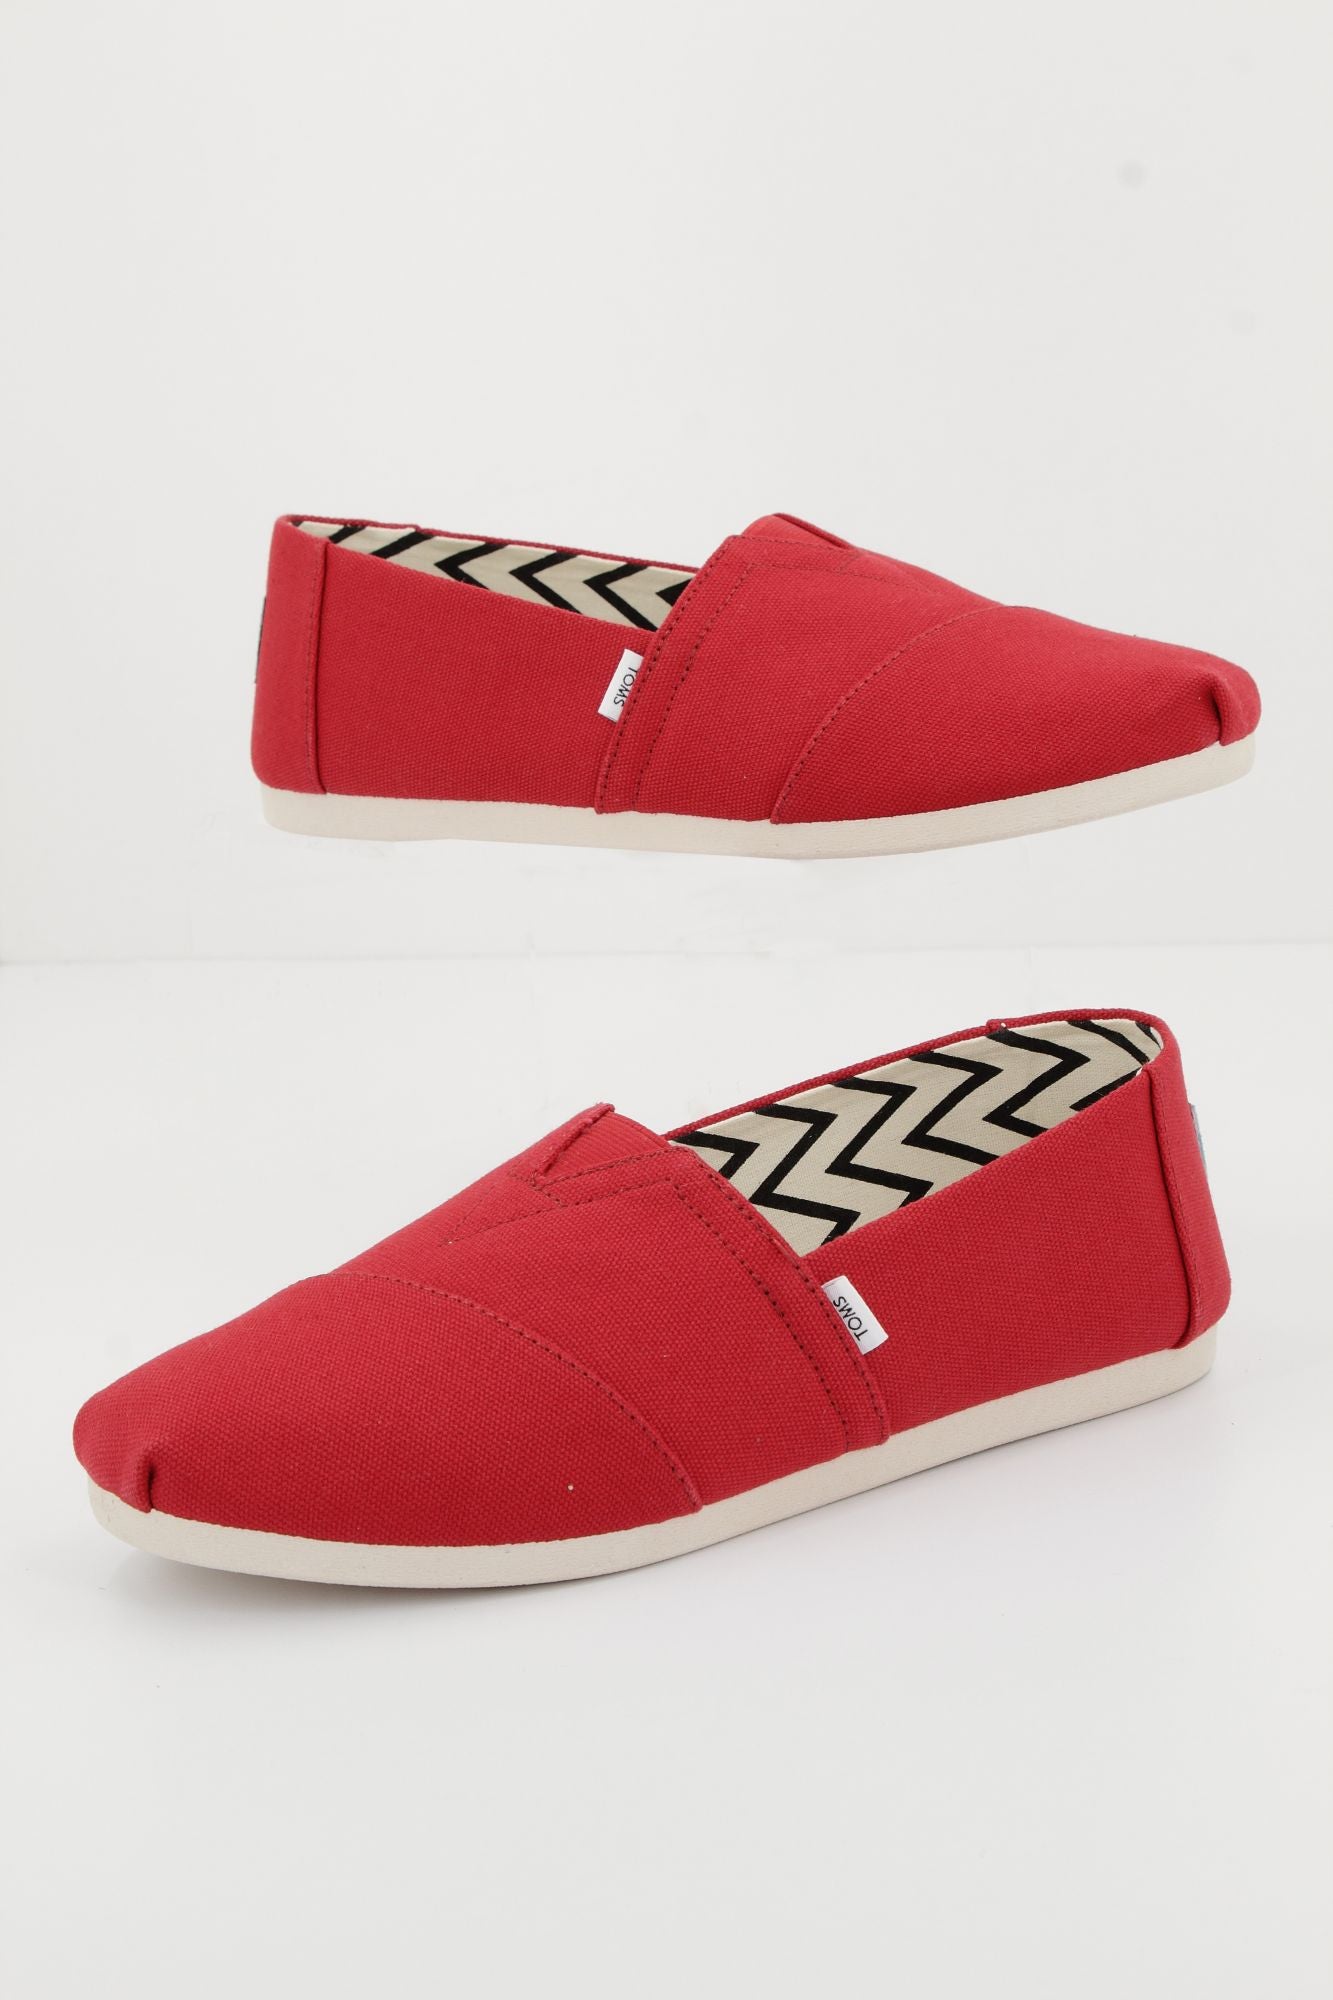 TOMS RED RECYCLED COTTON CANVAS en color ROJO (1)